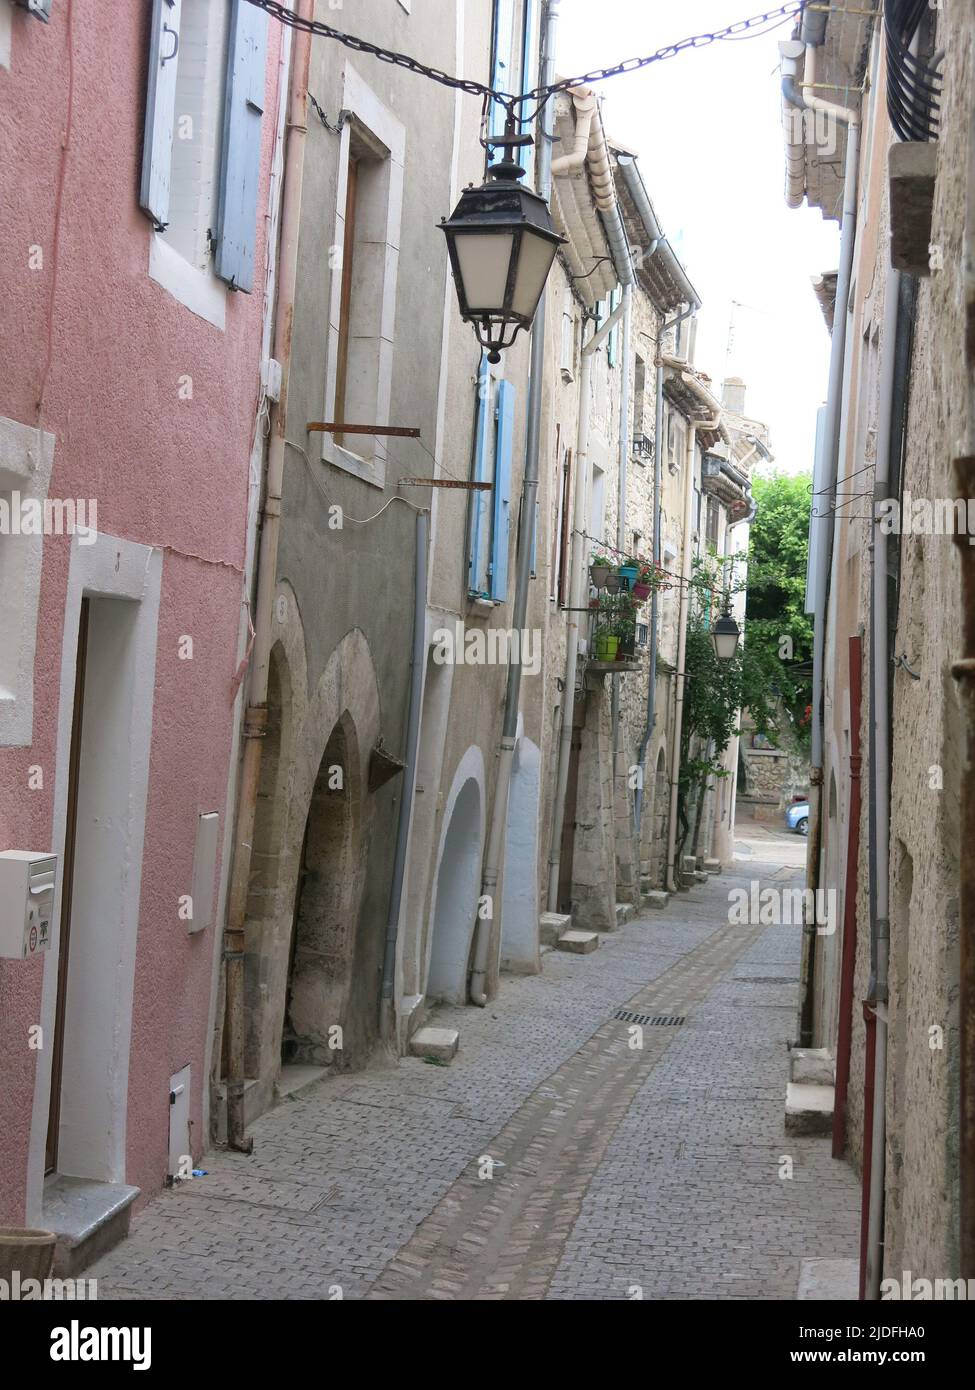 Follow a heritage trail through the narrow, winding streets of tall buildings in the quaint old town of Viviers, France's smallest city. Stock Photo